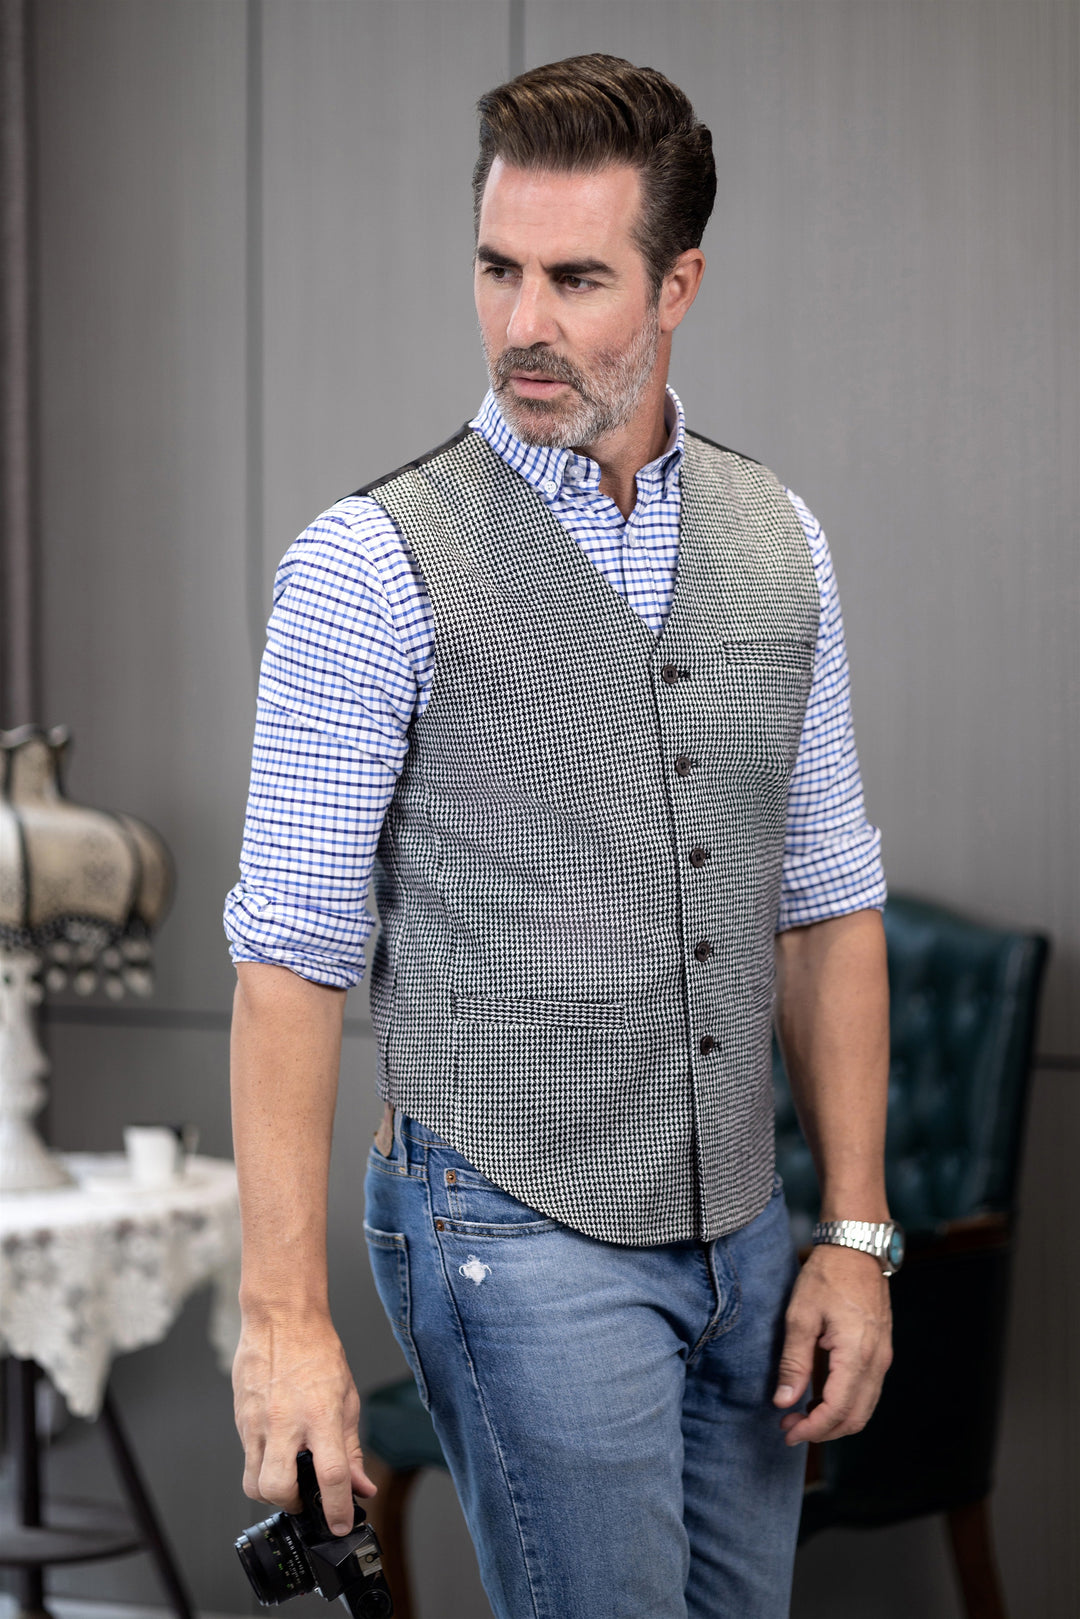 Fashion Casual Men's Slim Fit Tweed Houndstooth V Neck Waistcoat mens event wear